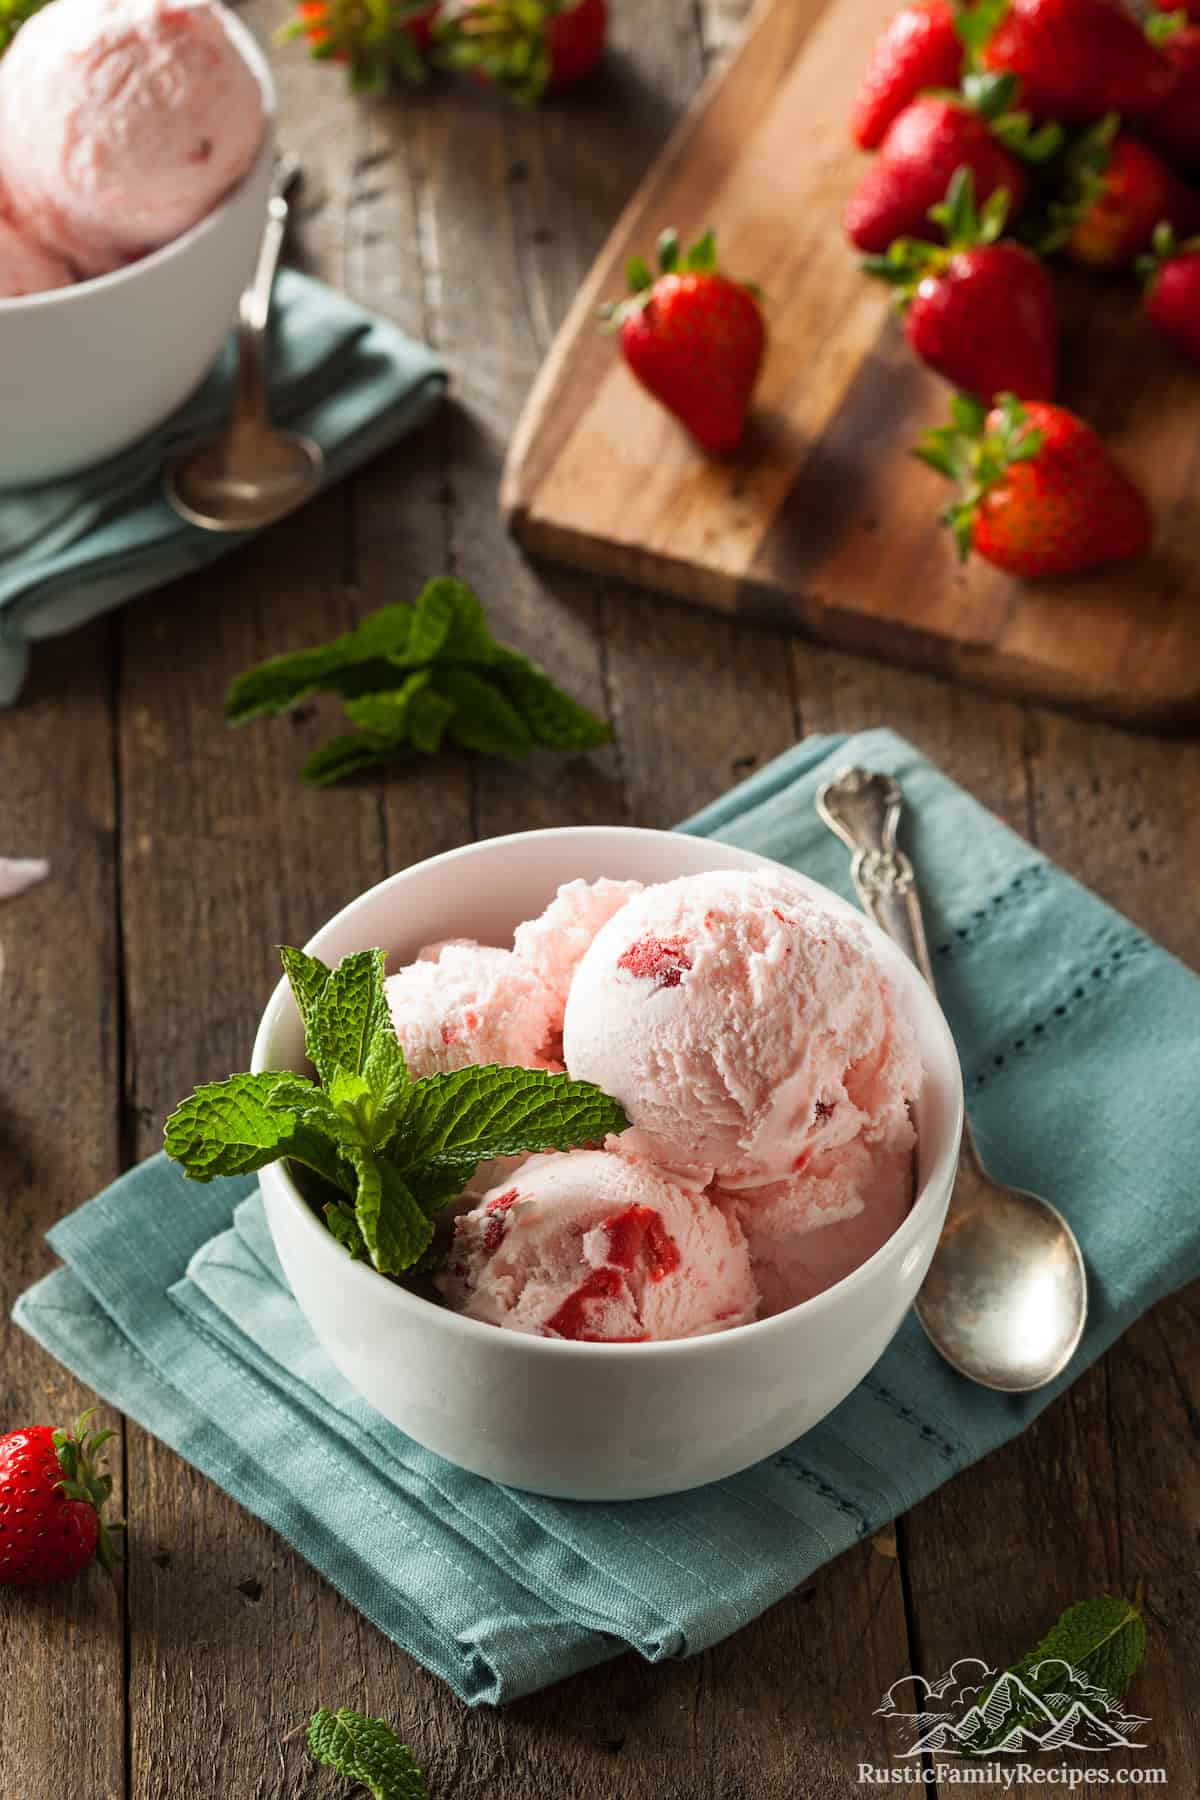 Scoops of strawberry ice cream in a bowl garnished with mint, with strawberries scattered on a wooden board in the background.